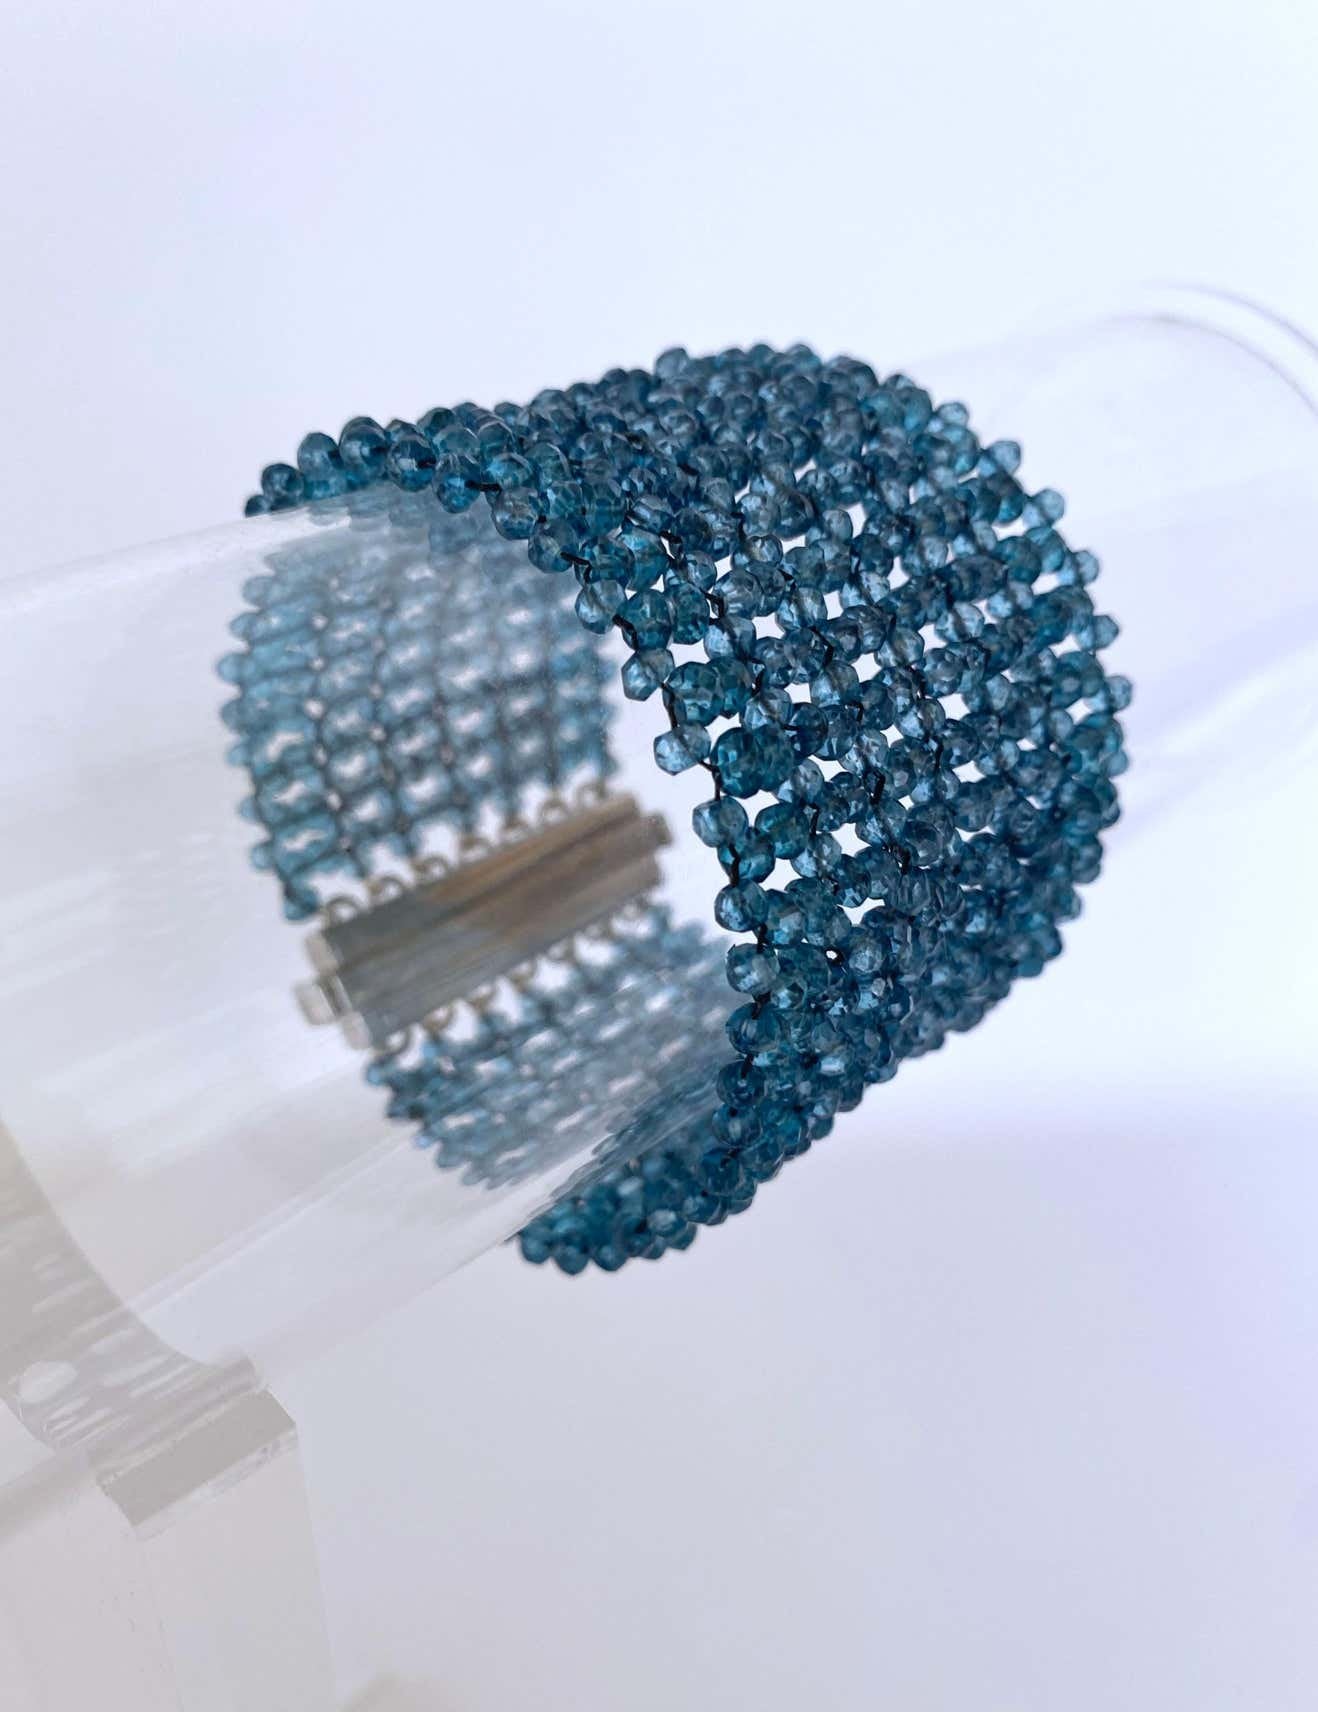 Wide Woven London Blue Topaz Beaded Bracelet with Silver Clasp